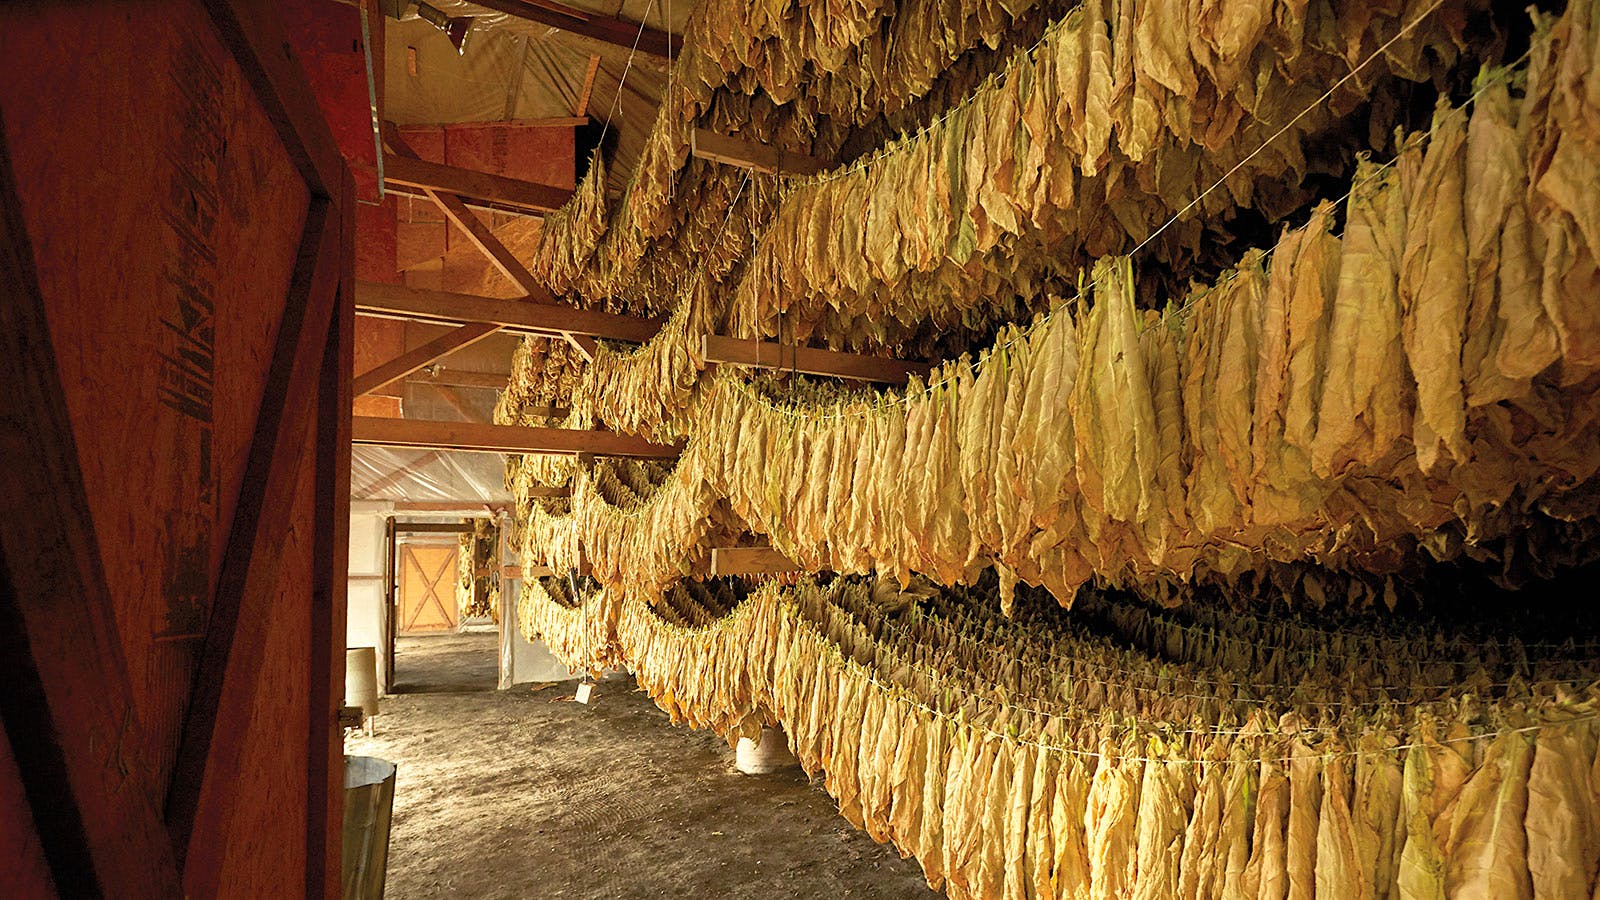 Rows and rows of shade tobacco leaves hang in a barn on the S. Arnold & Co. farm. The leaves will cure in the barn for at least 40 days, developing a golden brown color.